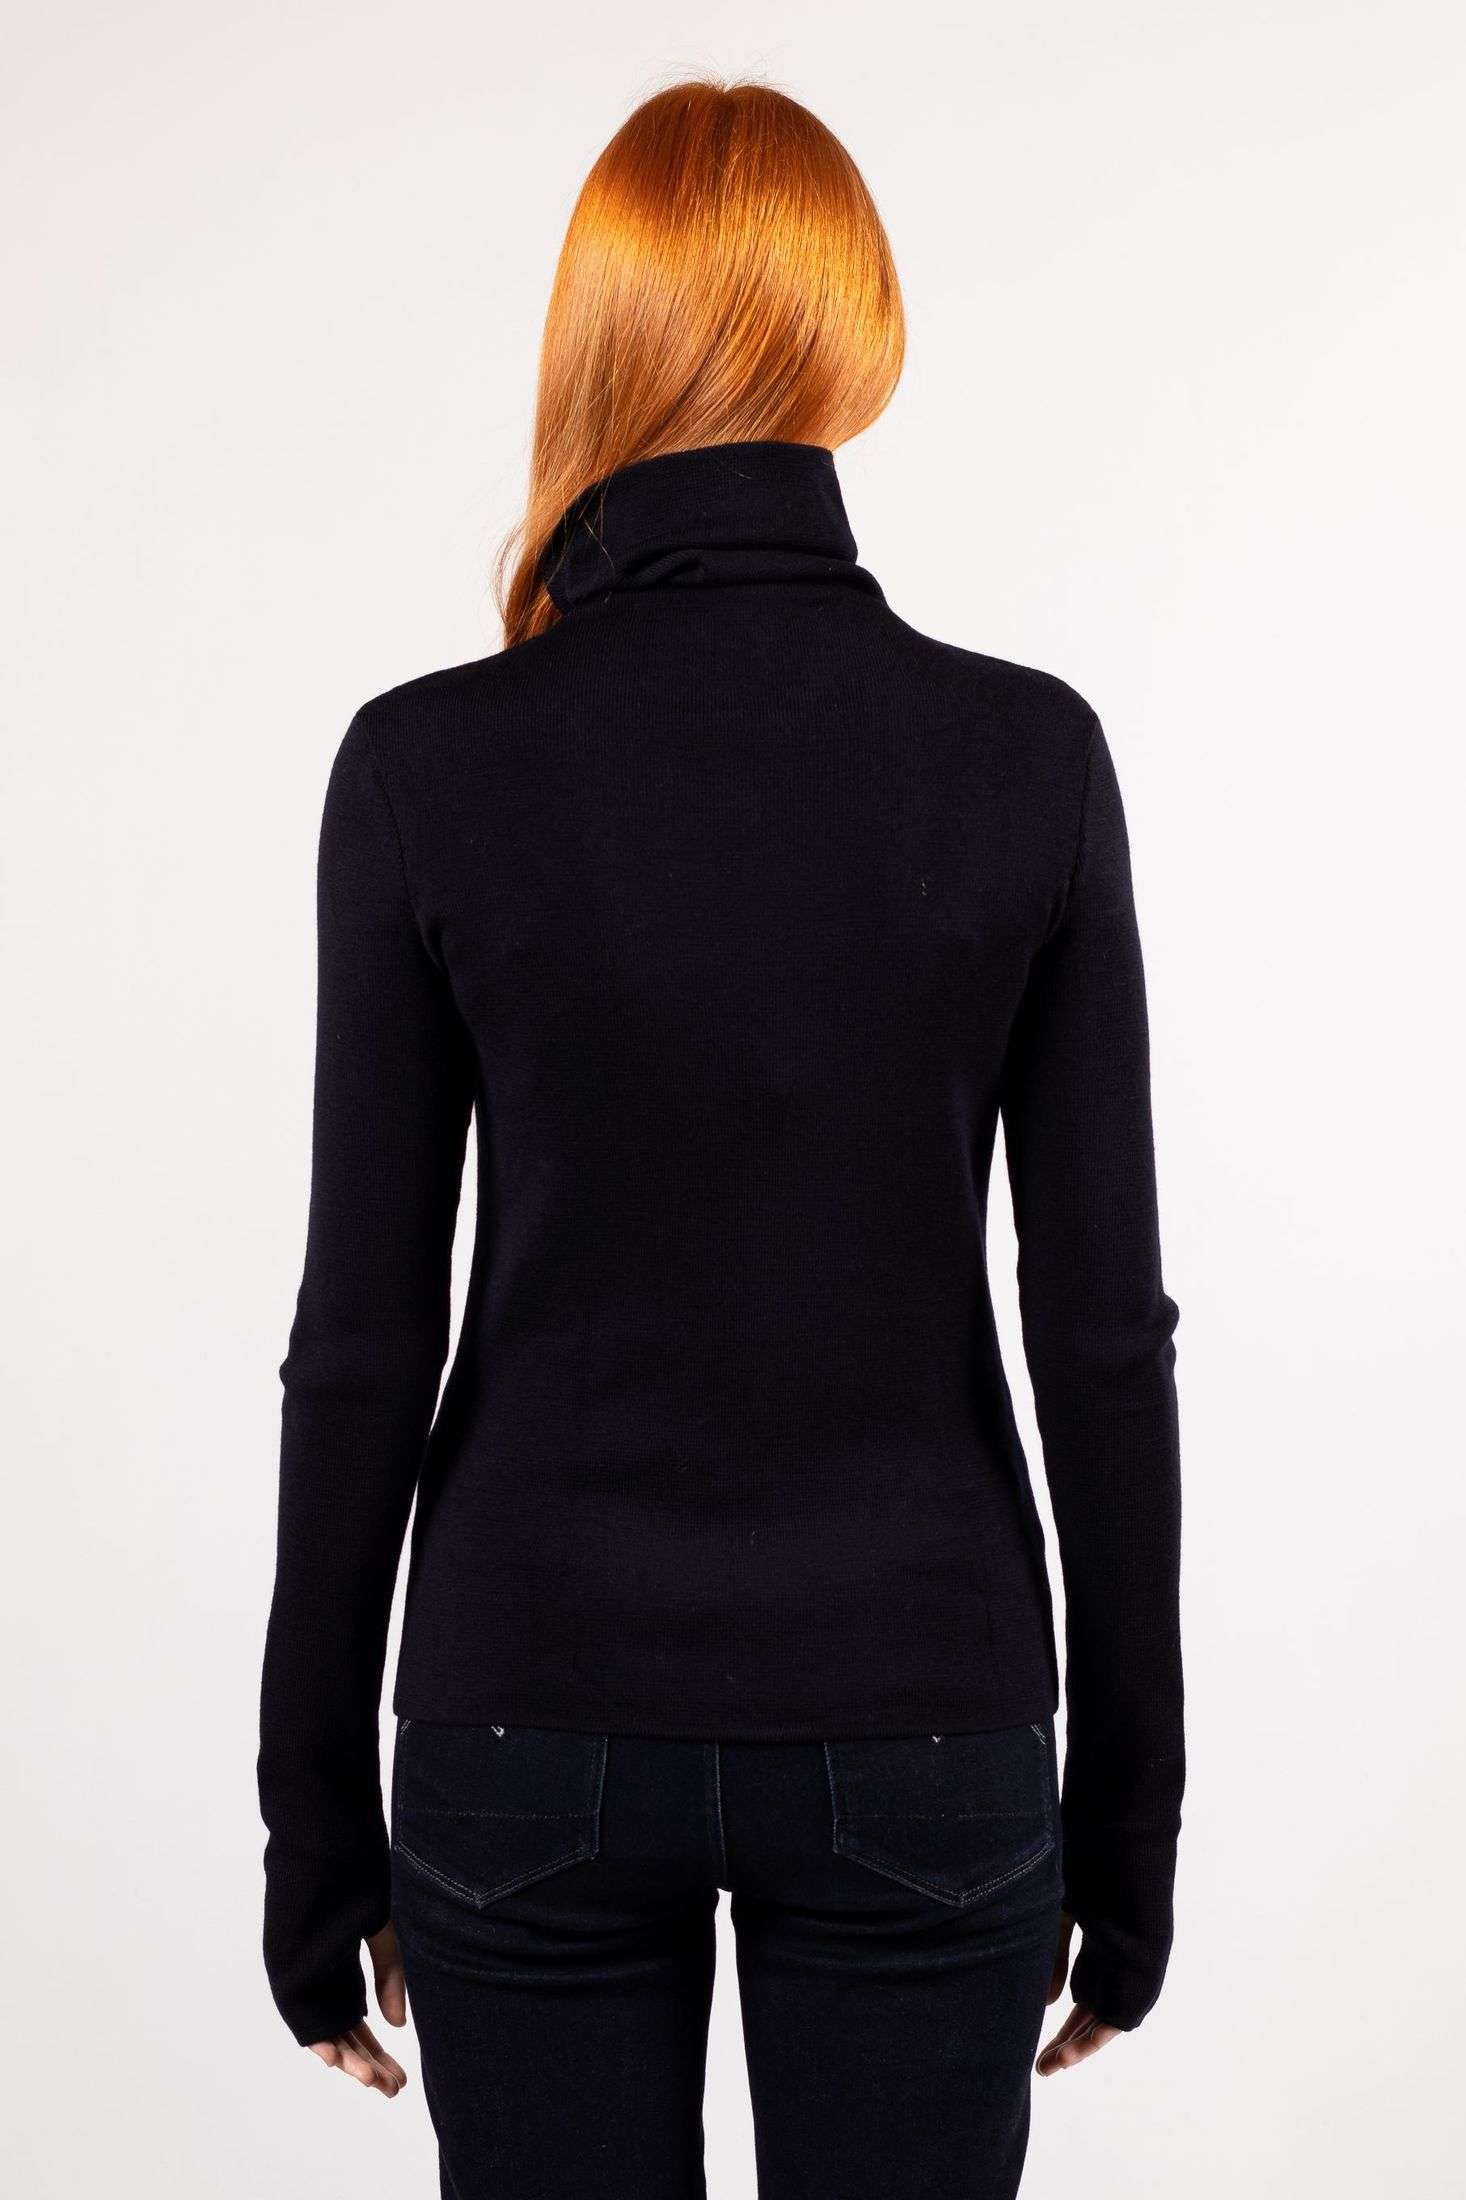 A young woman wears a fine knit turtleneck ADA in navy color, back view